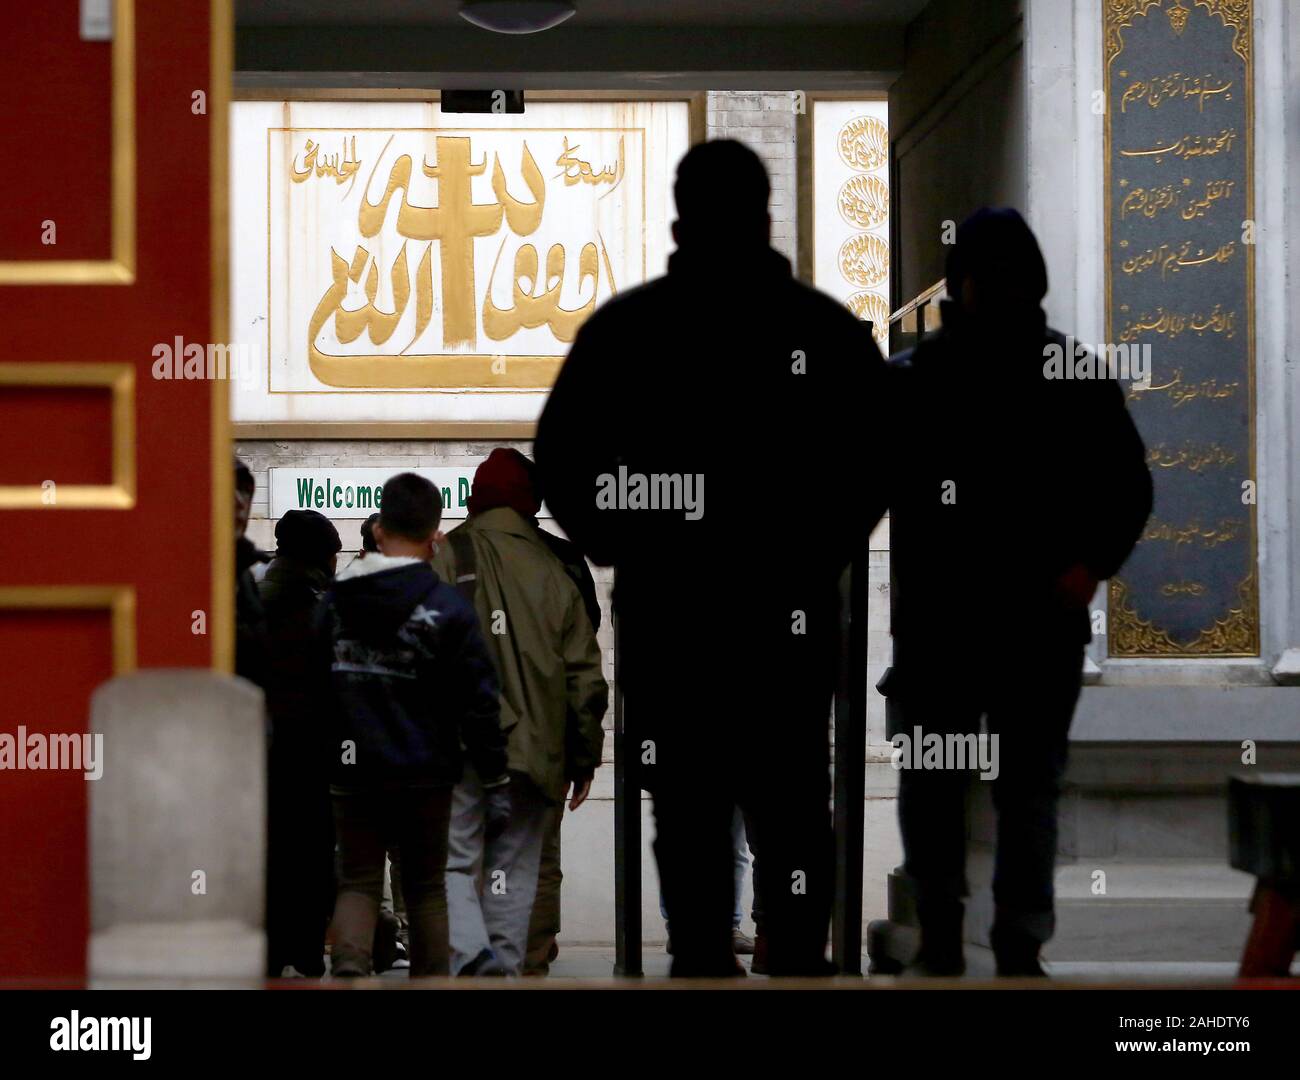 Beijing, China. 28th Dec, 2019. Chinese Muslims visit a popular mosque in central Beijing on Saturday, December 28, 2019. In a rare show of bipartisan unity, both Republicans and Democrats are planning to try to force U.S. President Donald Trump to take a more active stand on human rights in China, preparing veto-proof legislation that would punish top Chinese officials for detaining more than one million Muslims in internment camps. Photo by Stephen Shaver/UPI Credit: UPI/Alamy Live News Stock Photo